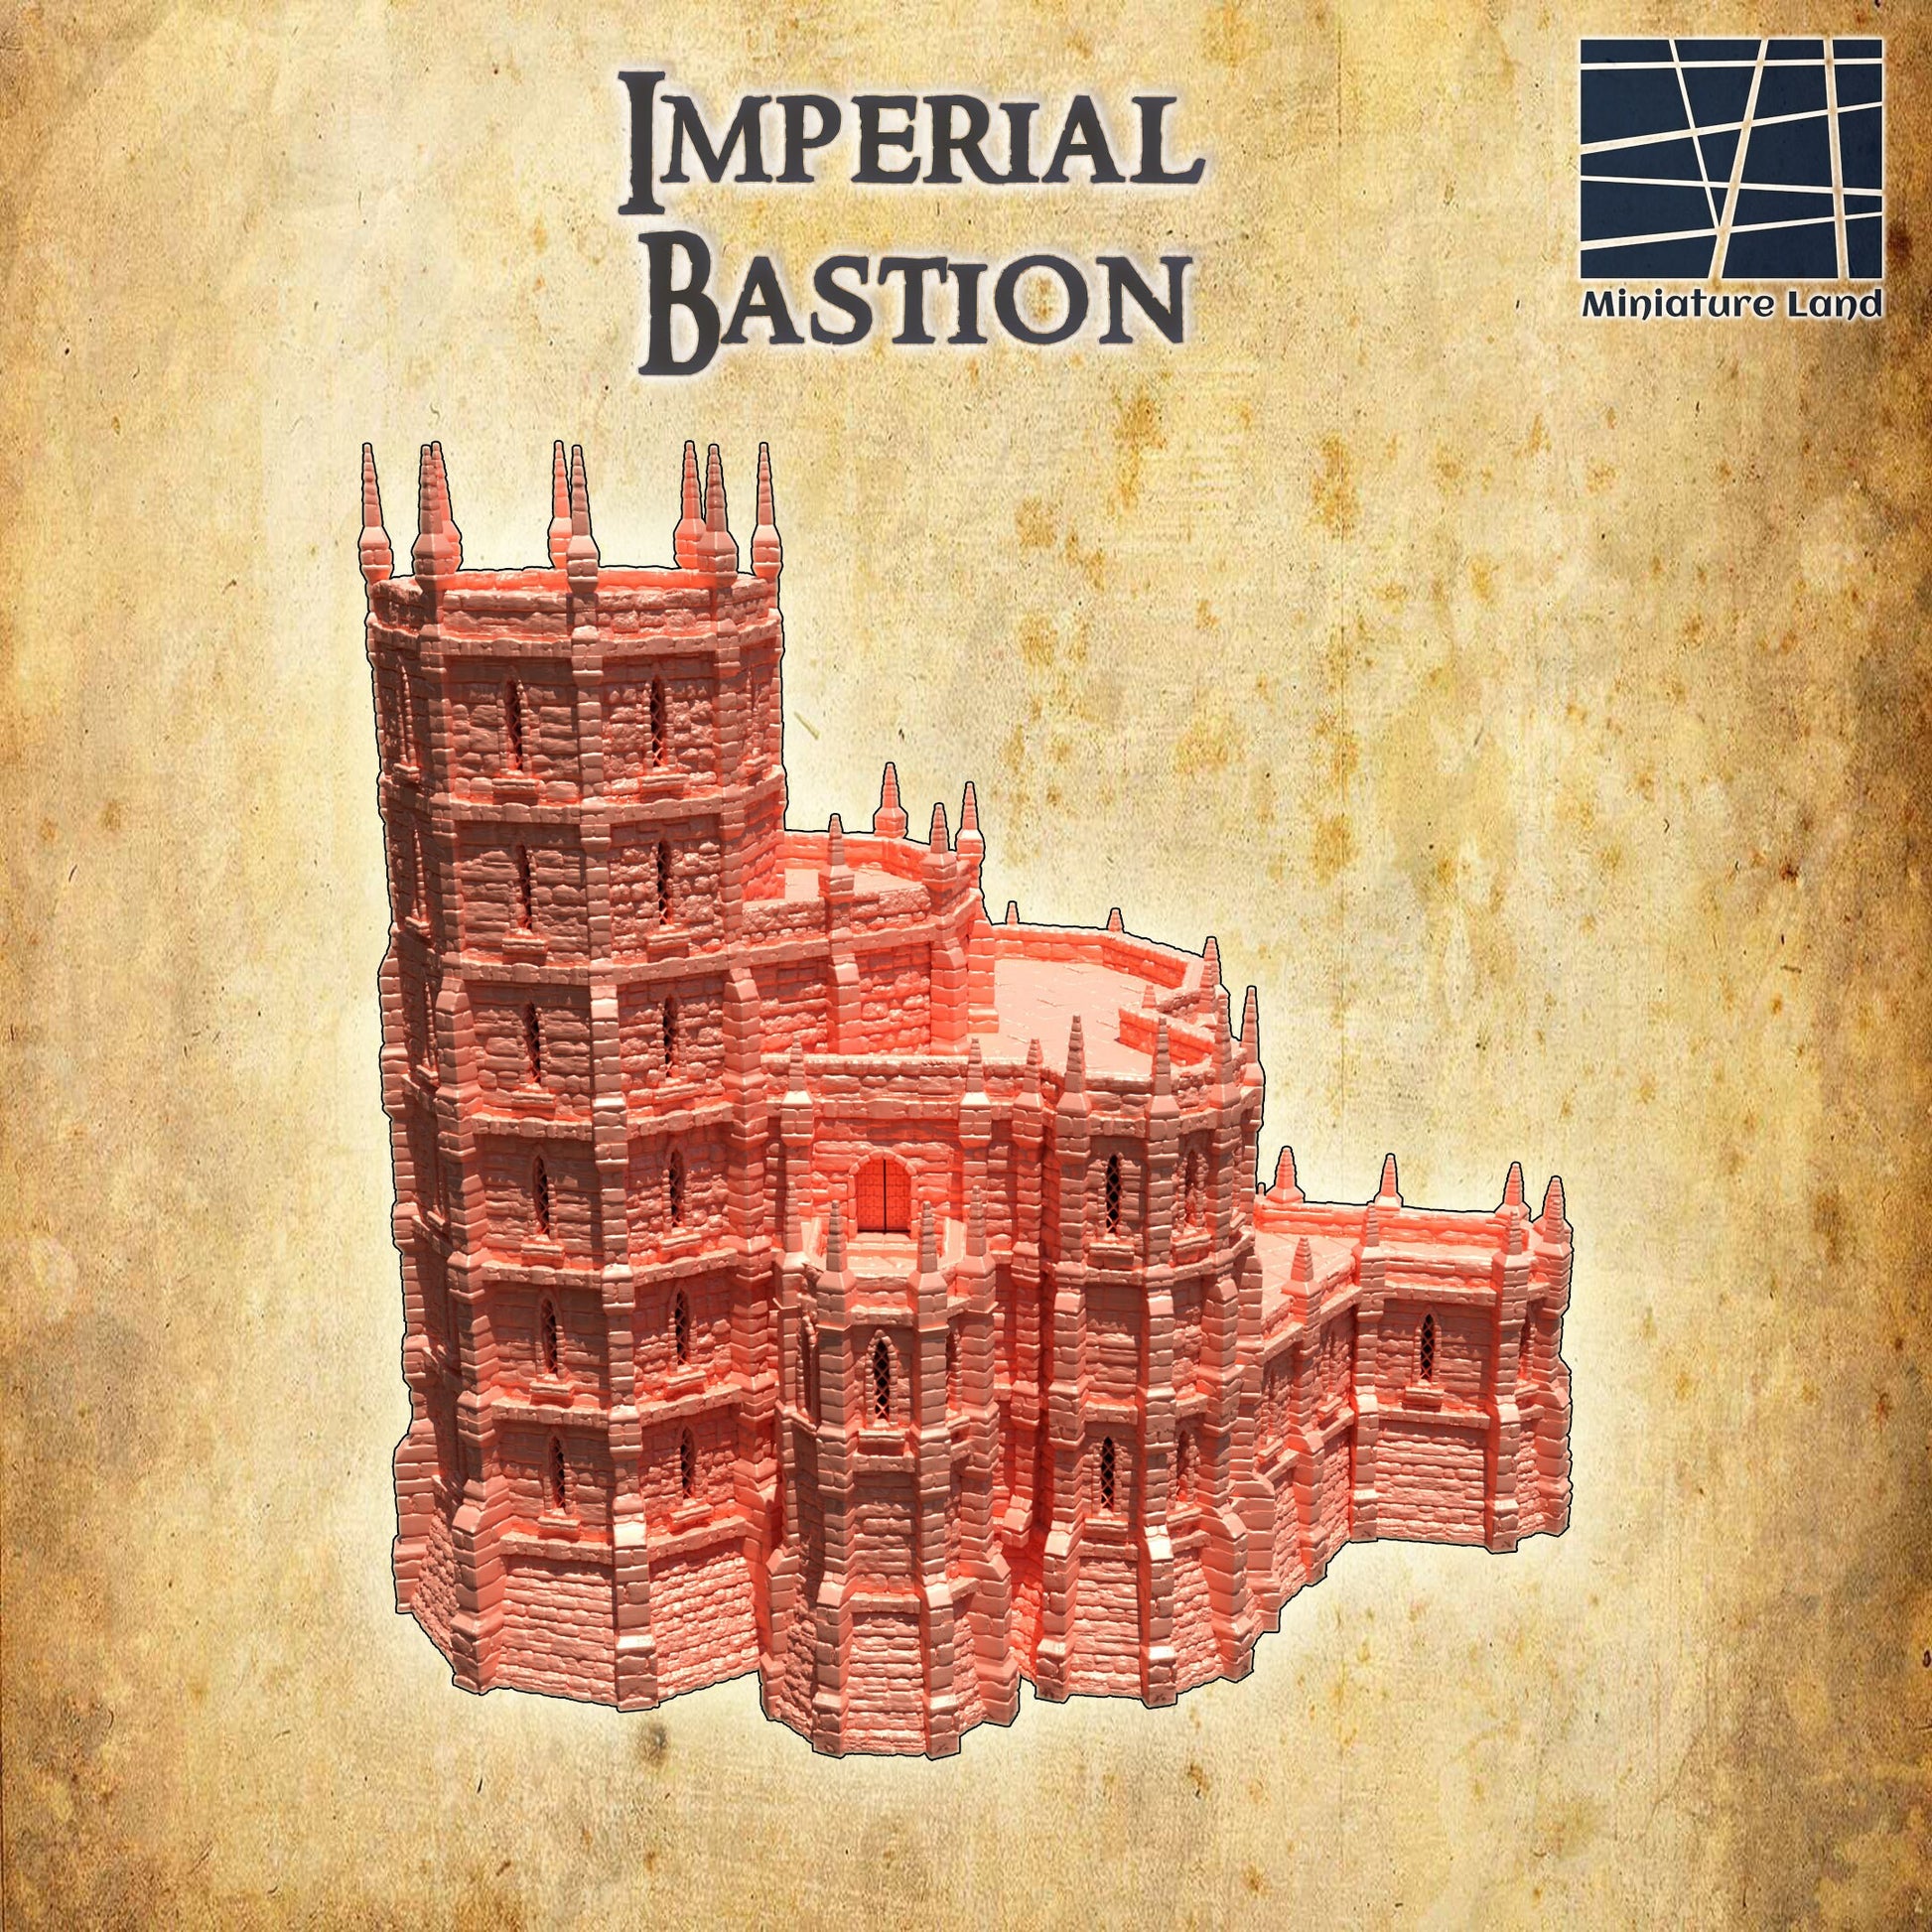 Imperial Bastion, Imperial Keep, Castle Keep